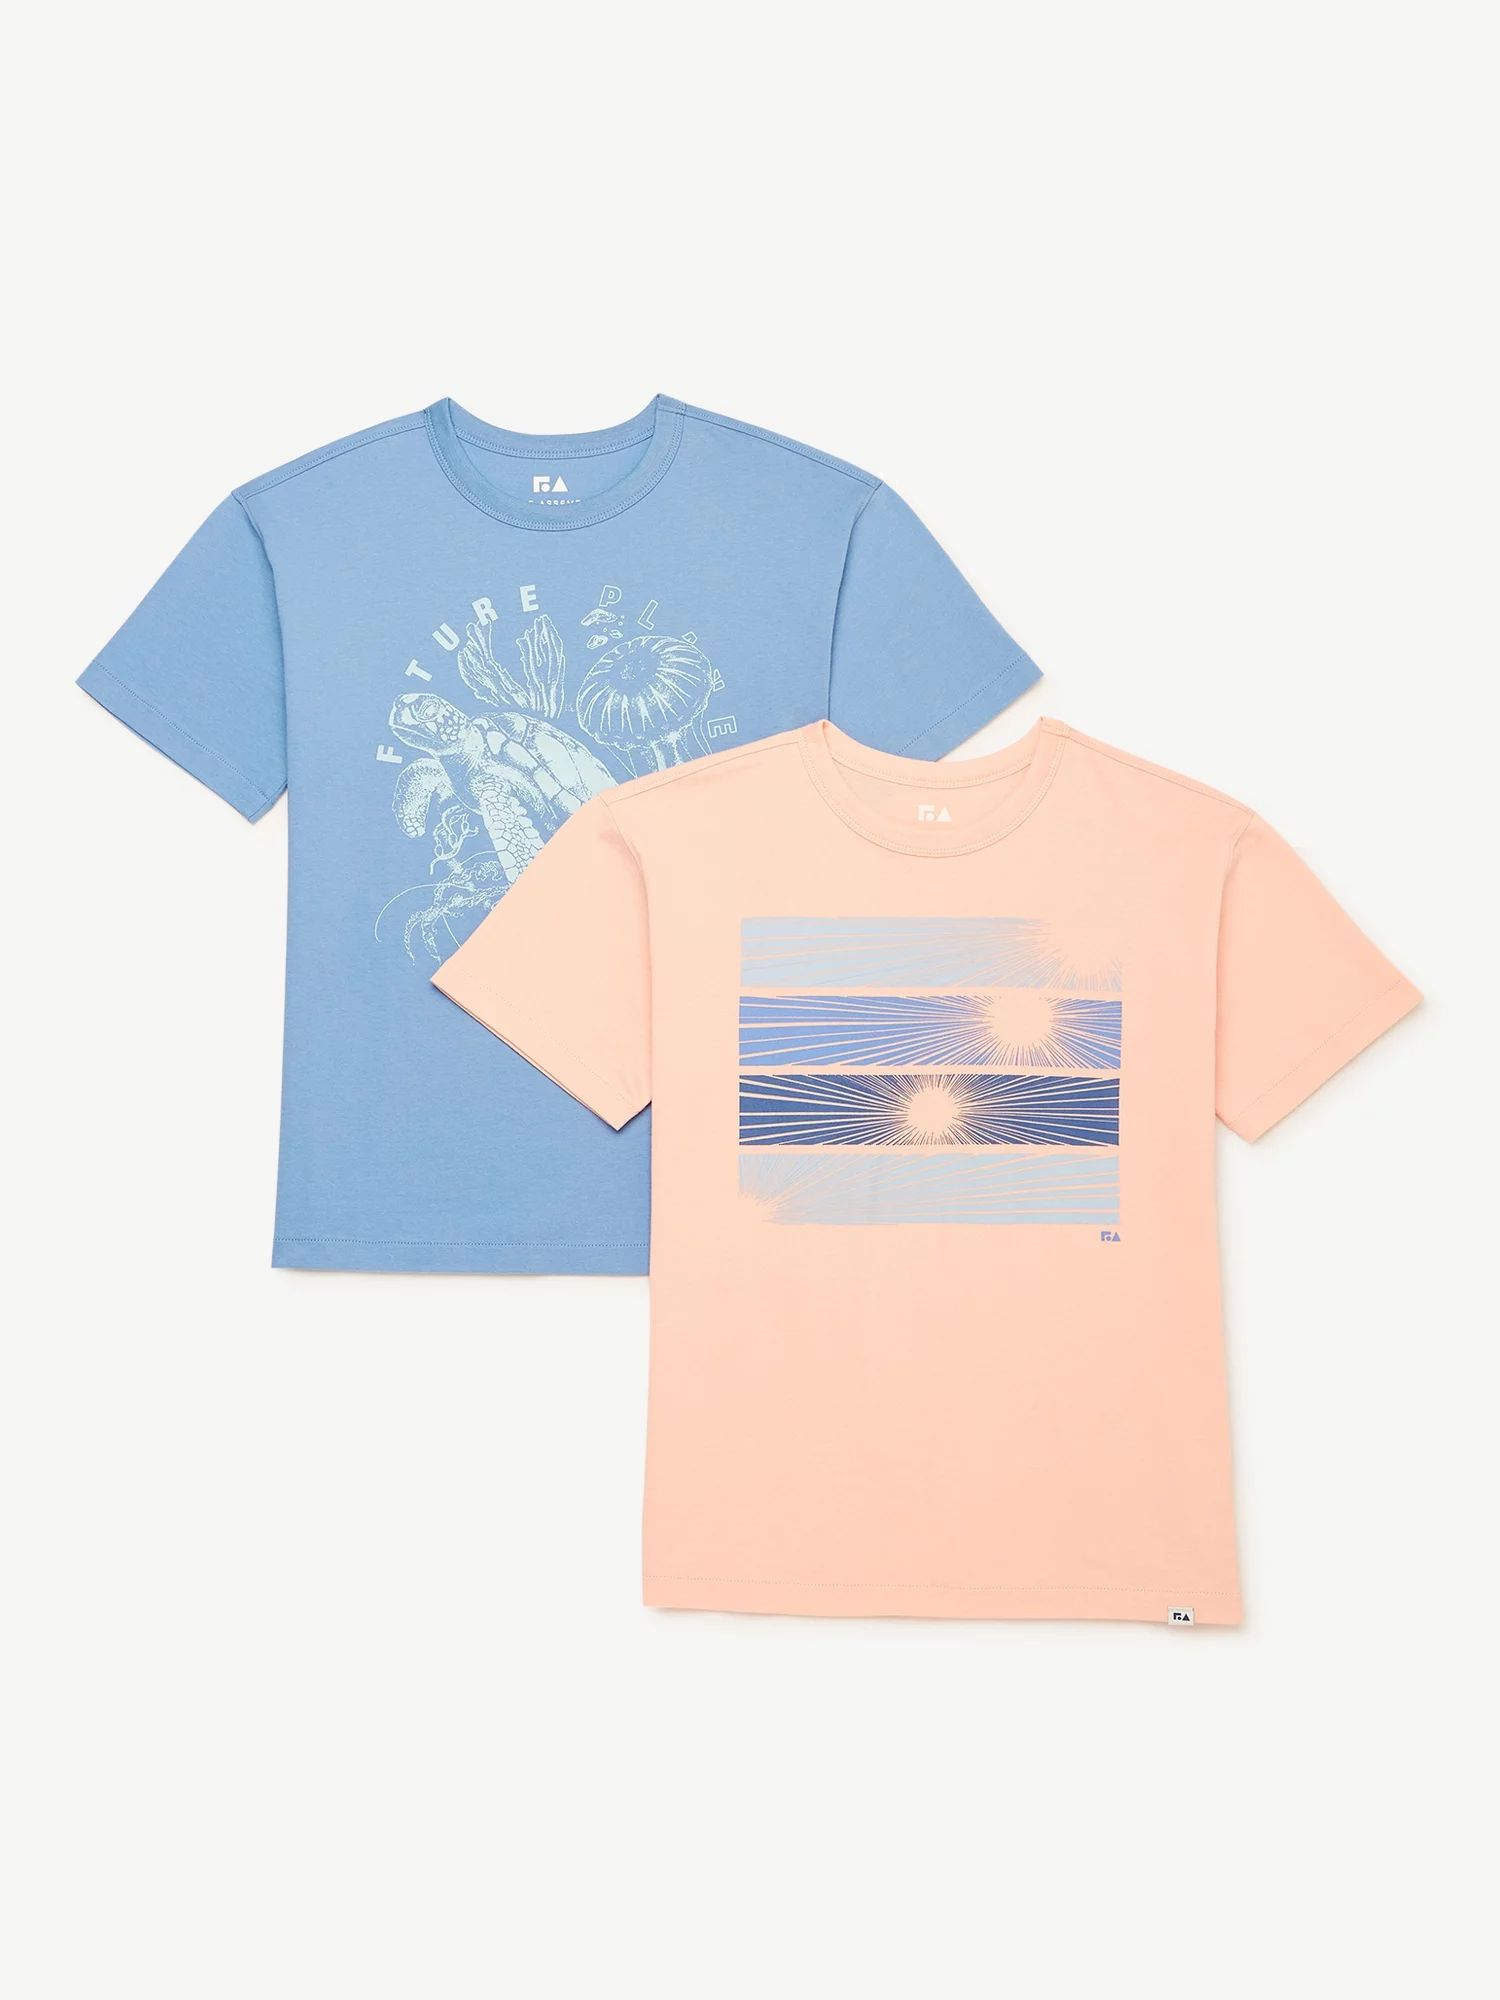 Free Assembly Boys Short Sleeve Graphic Tee, 2-Pack, Sizes 4-18 | Walmart (US)